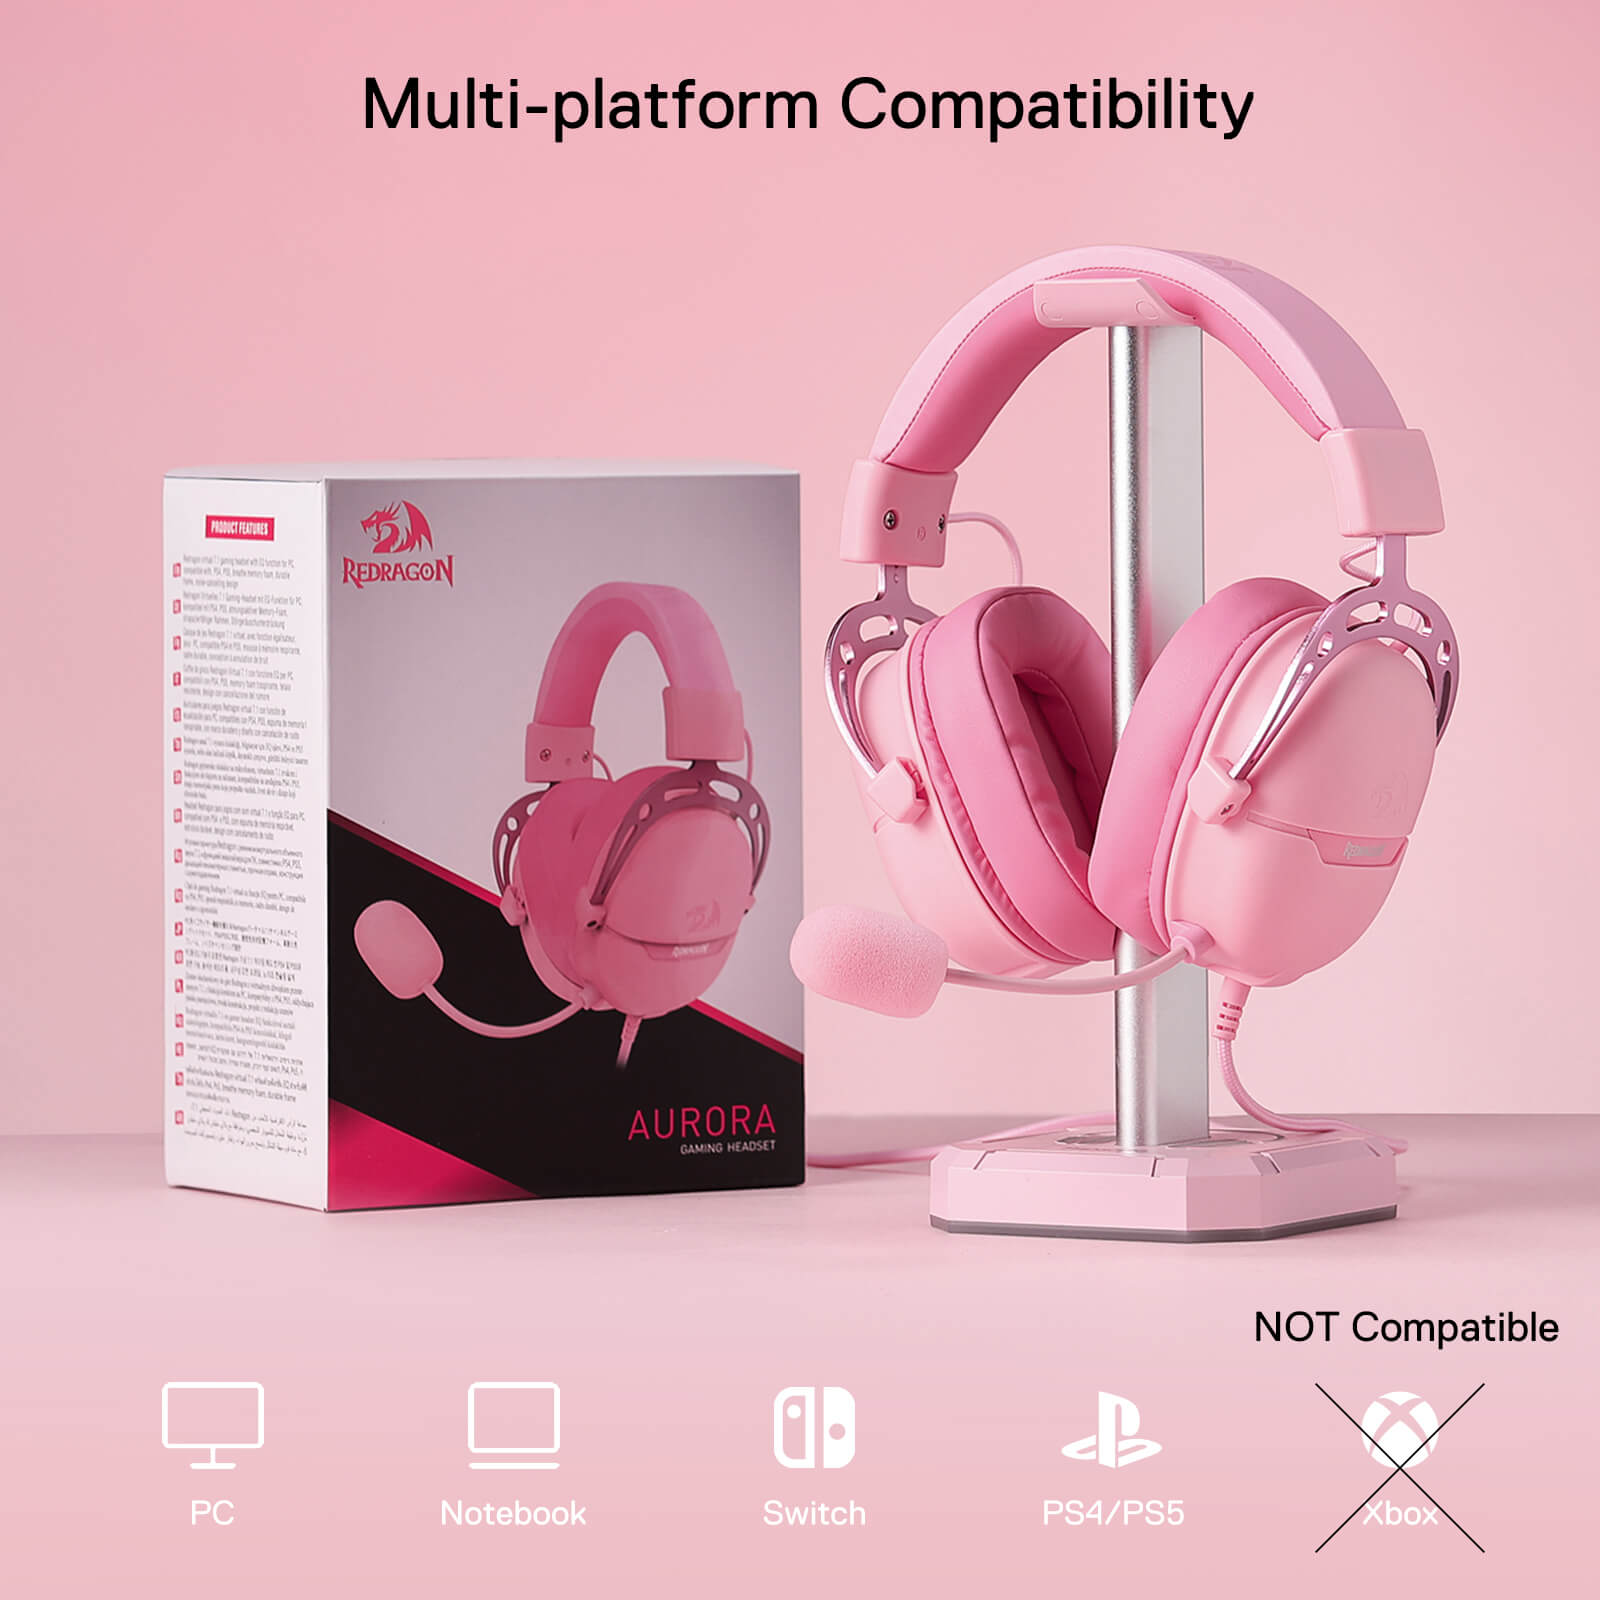 Redragon H376 Aurora Wired Gaming Headset, Virtual 7.1 Surround Sound, 40mm Drivers, in-line Control with EQ Mode, Over-Ear pink Headphones Works for PC/PS5/NS